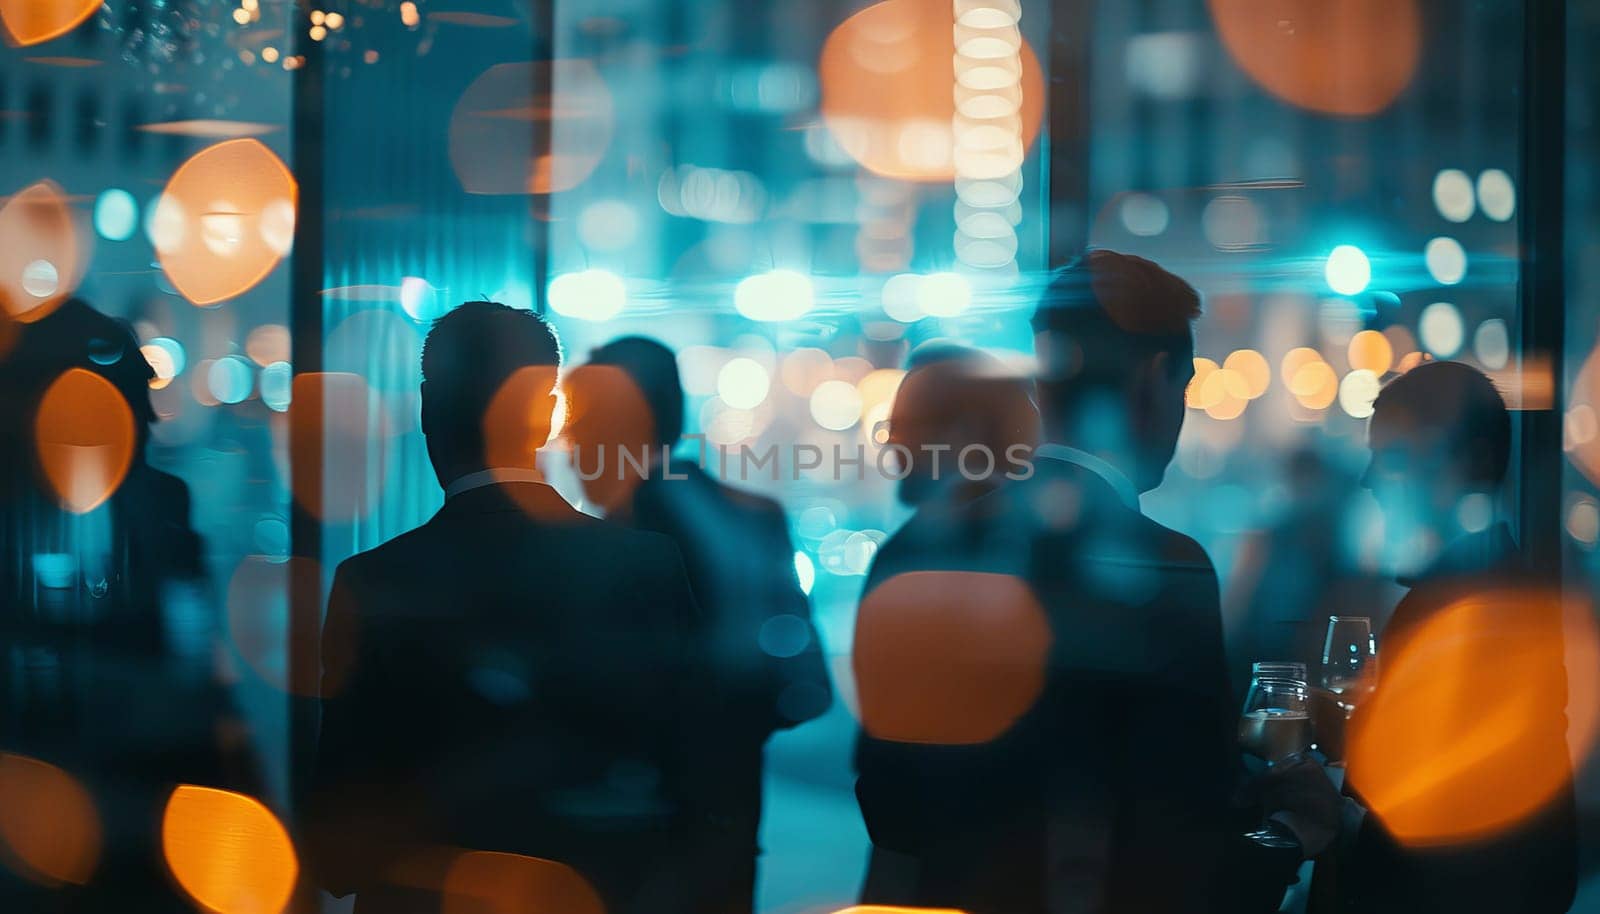 A blurry image of people walking in a city with a bright, colorful background by AI generated image.